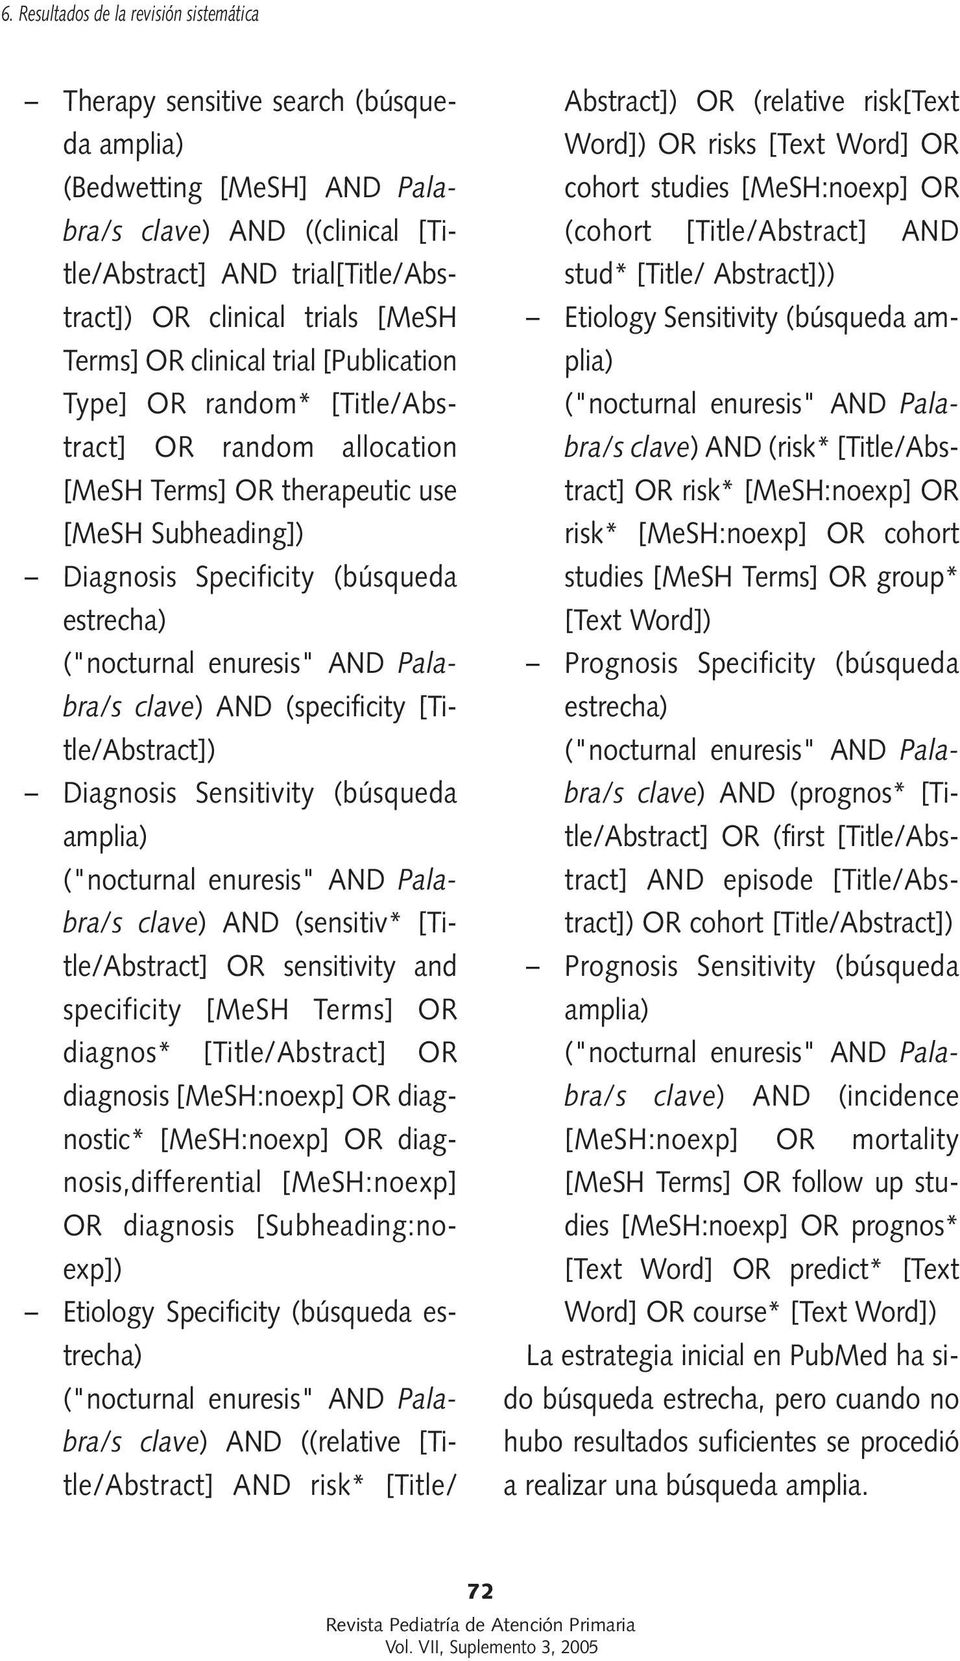 Sensitivity (búsqueda clave) AND (sensitiv* [Title/Abstract] OR sensitivity and specificity [MeSH Terms] OR diagnos* [Title/Abstract] OR diagnosis [MeSH:noexp] OR diagnostic* [MeSH:noexp] OR